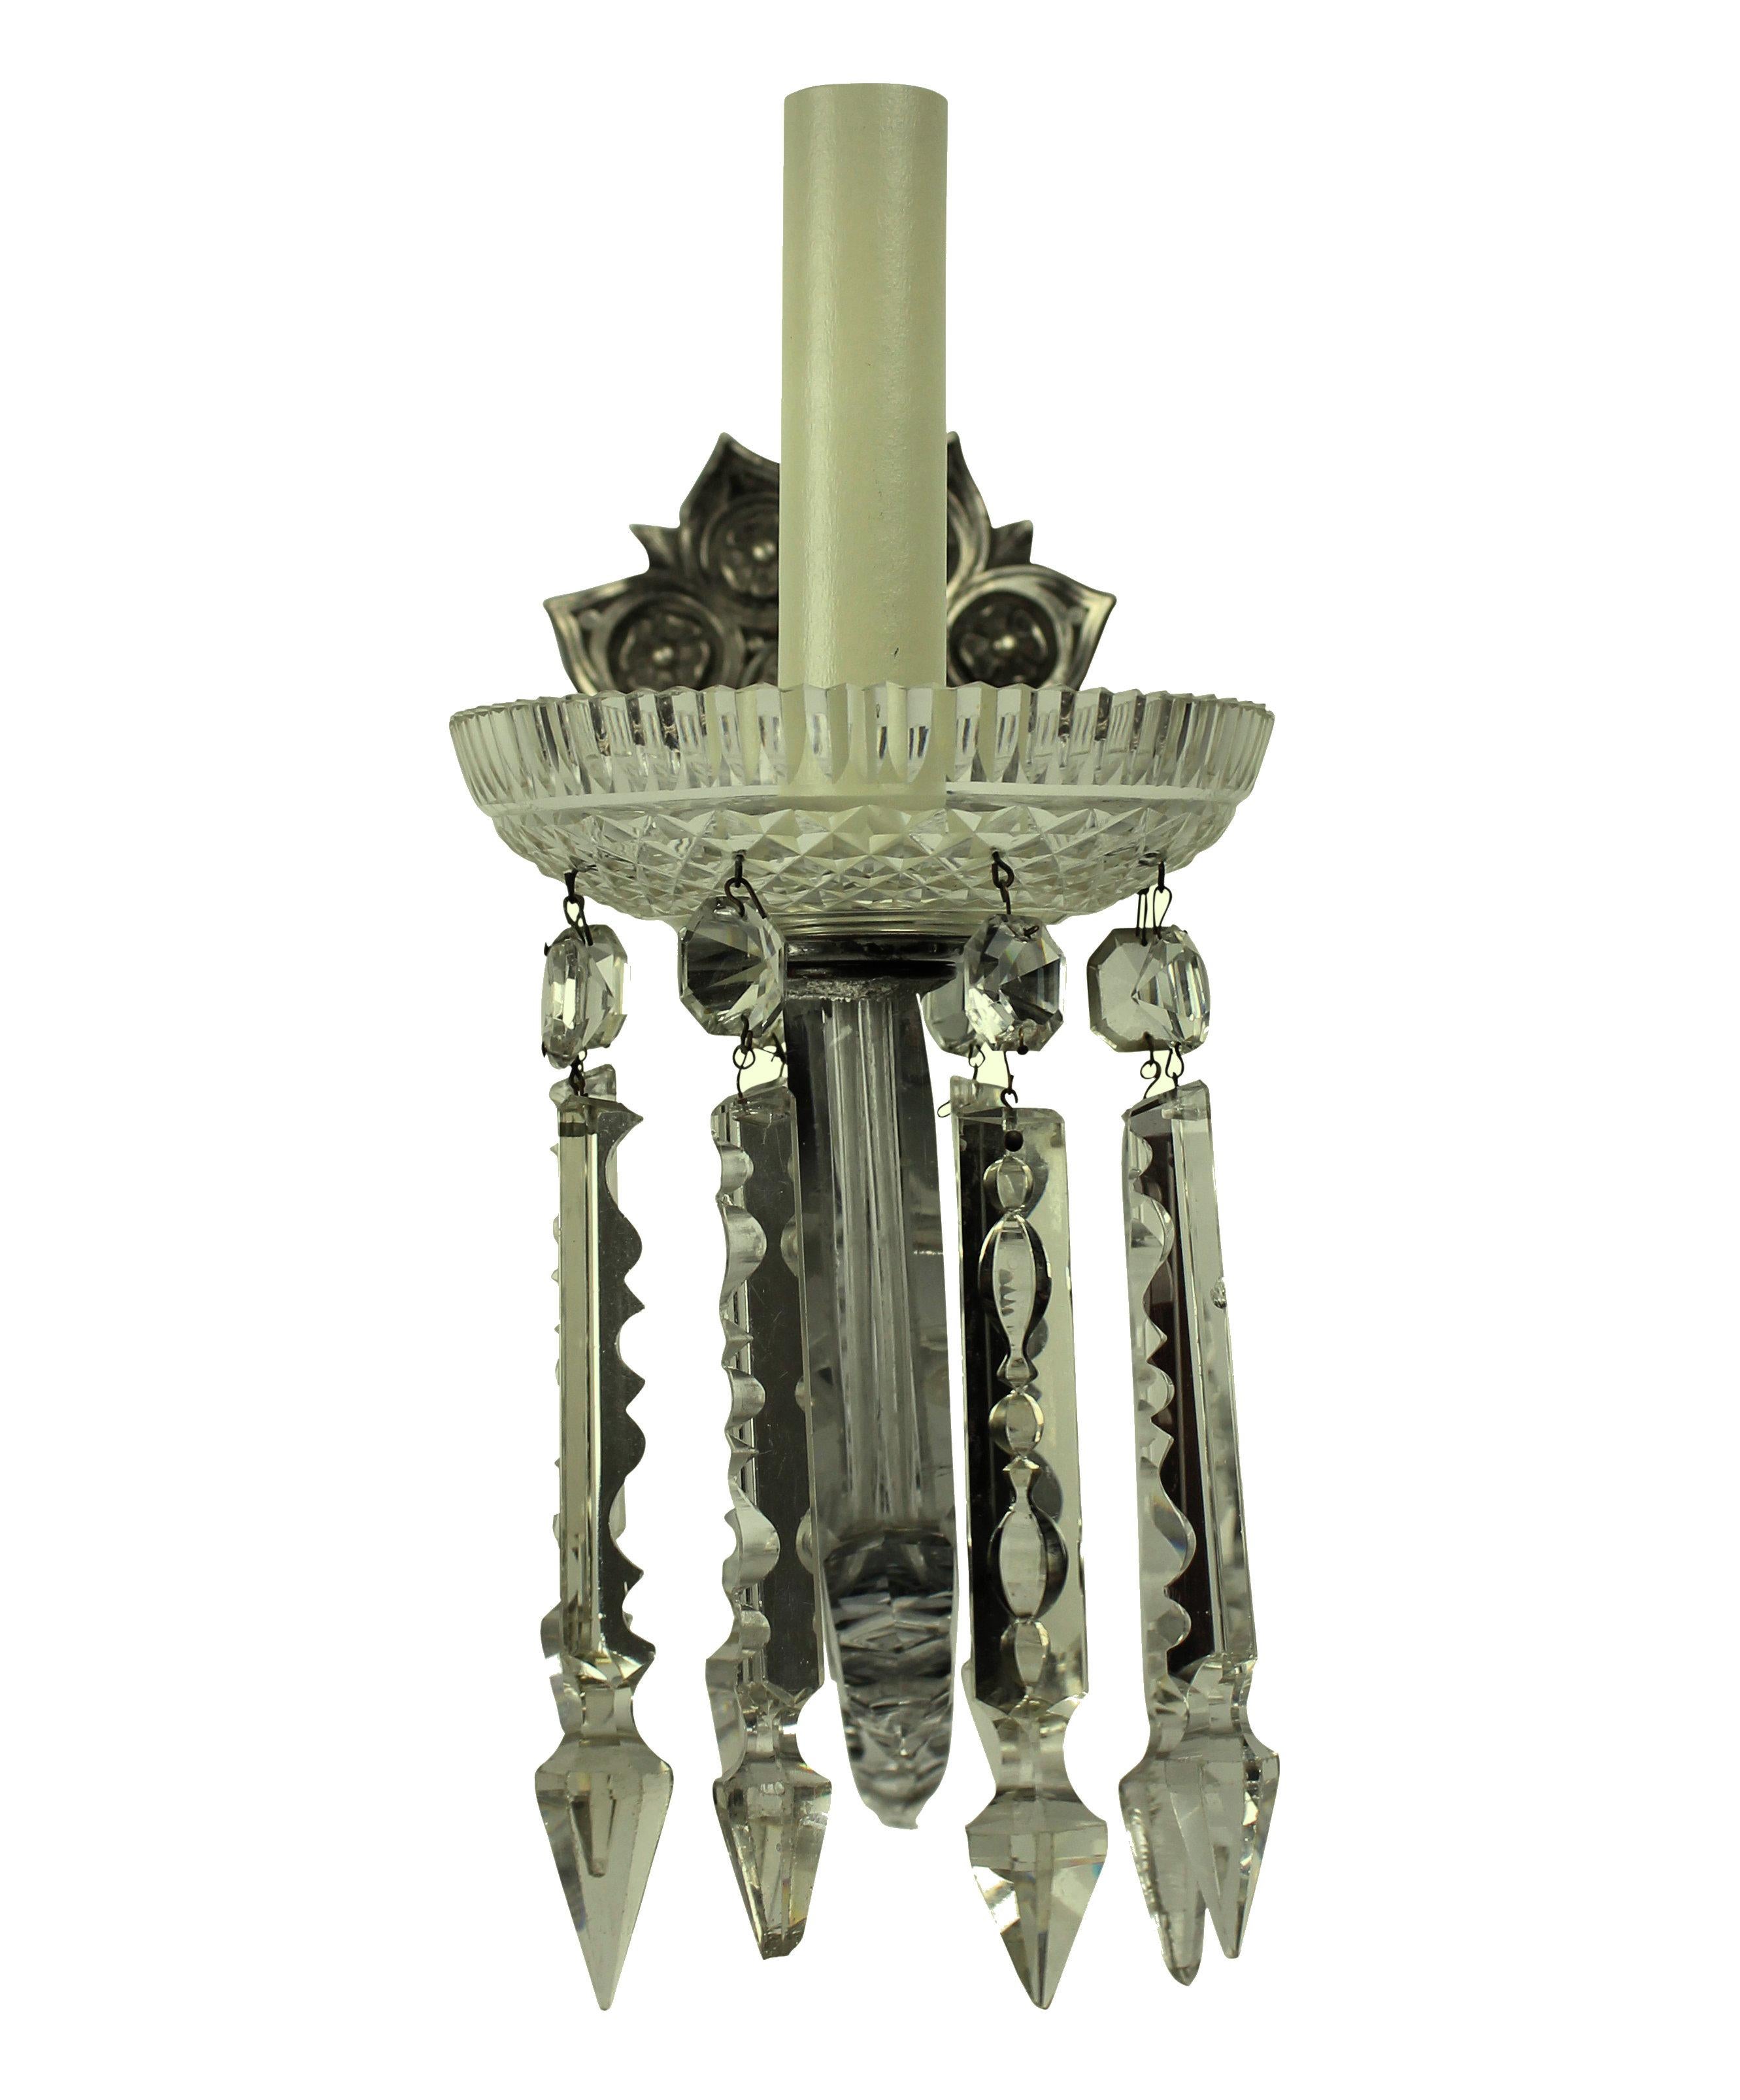 A pair of good quality English single arm sconces, with large up-swept handcut glass arms with decorative glass finials and a finely cut dish with pendants. The metal work of silvered bronze.